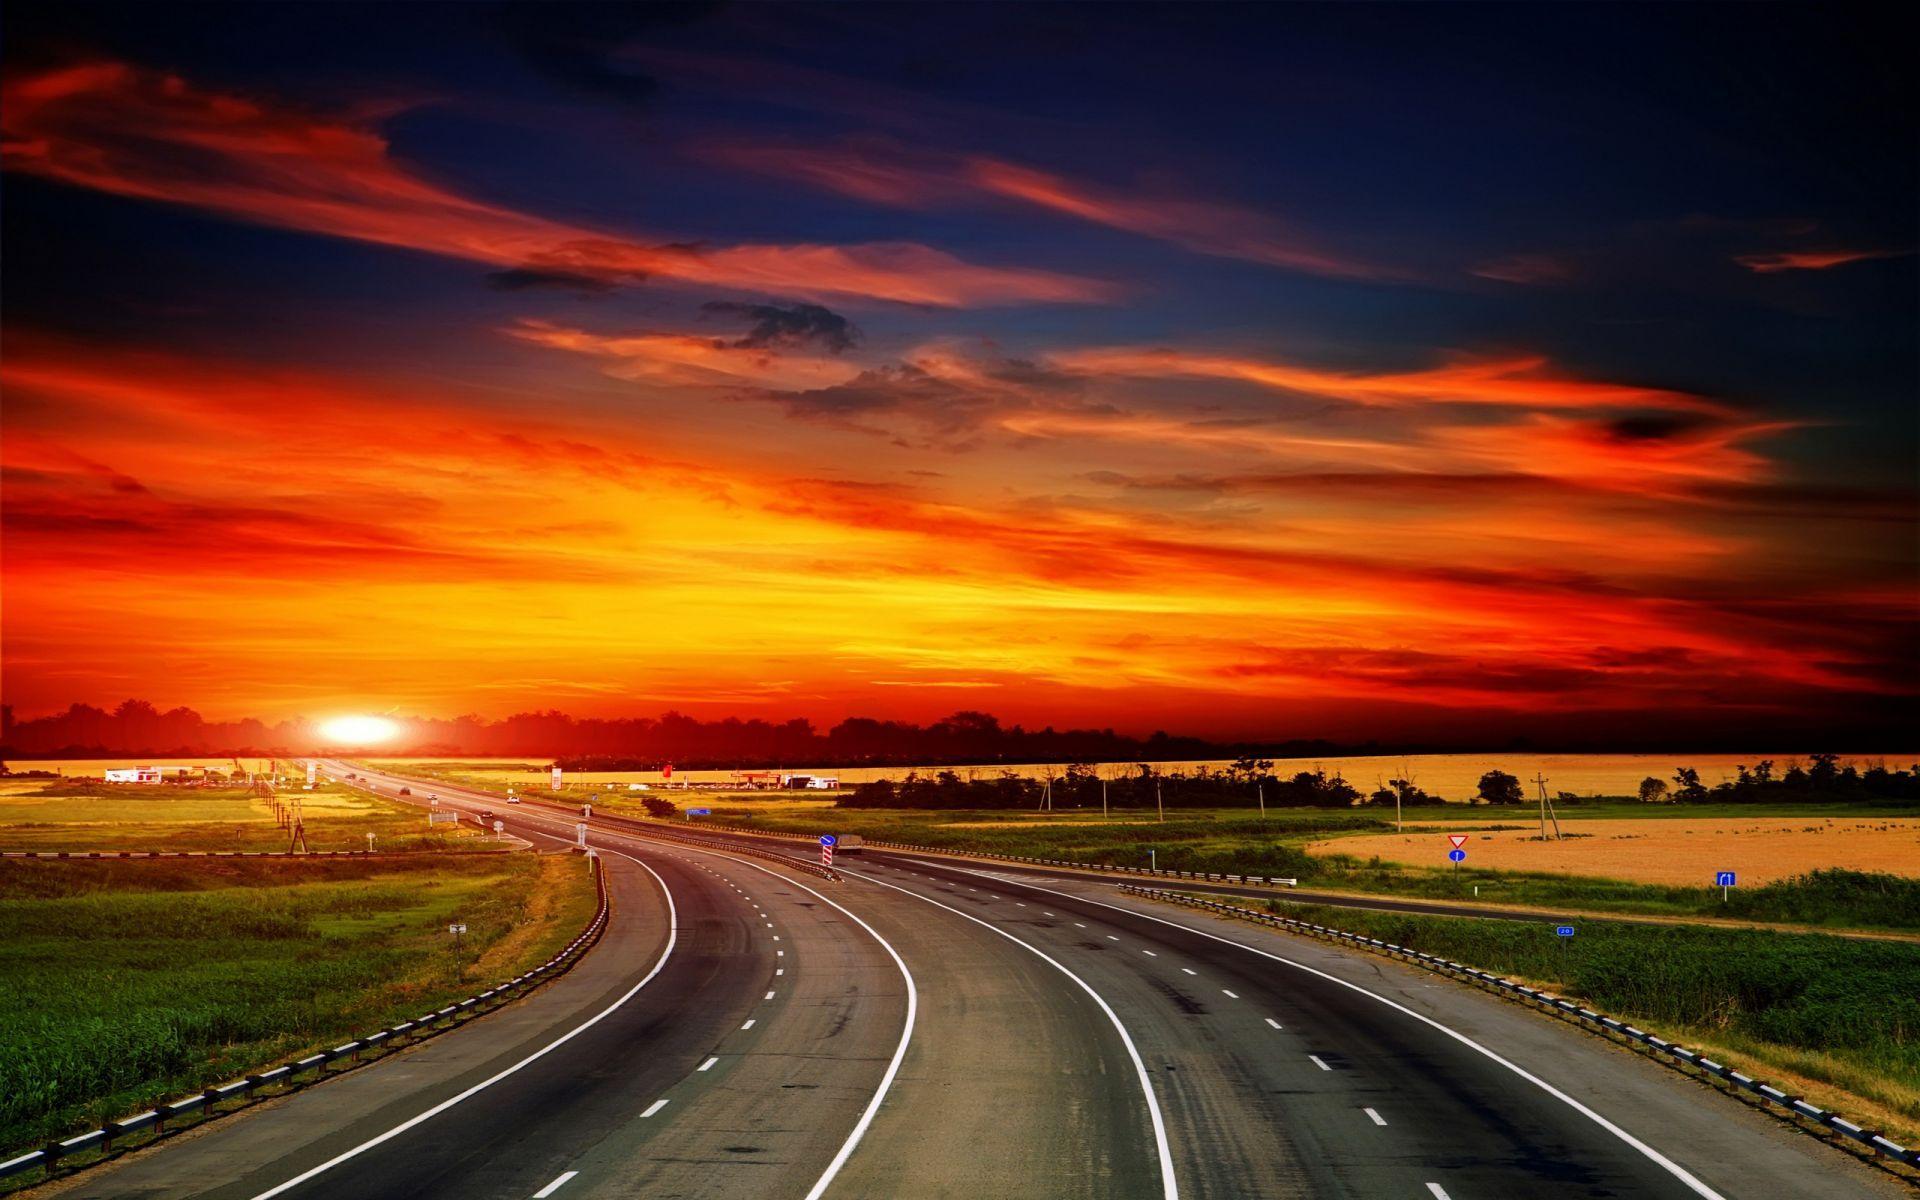 Big Highway With Beautiful Nature. HD Nature Wallpaper for Mobile